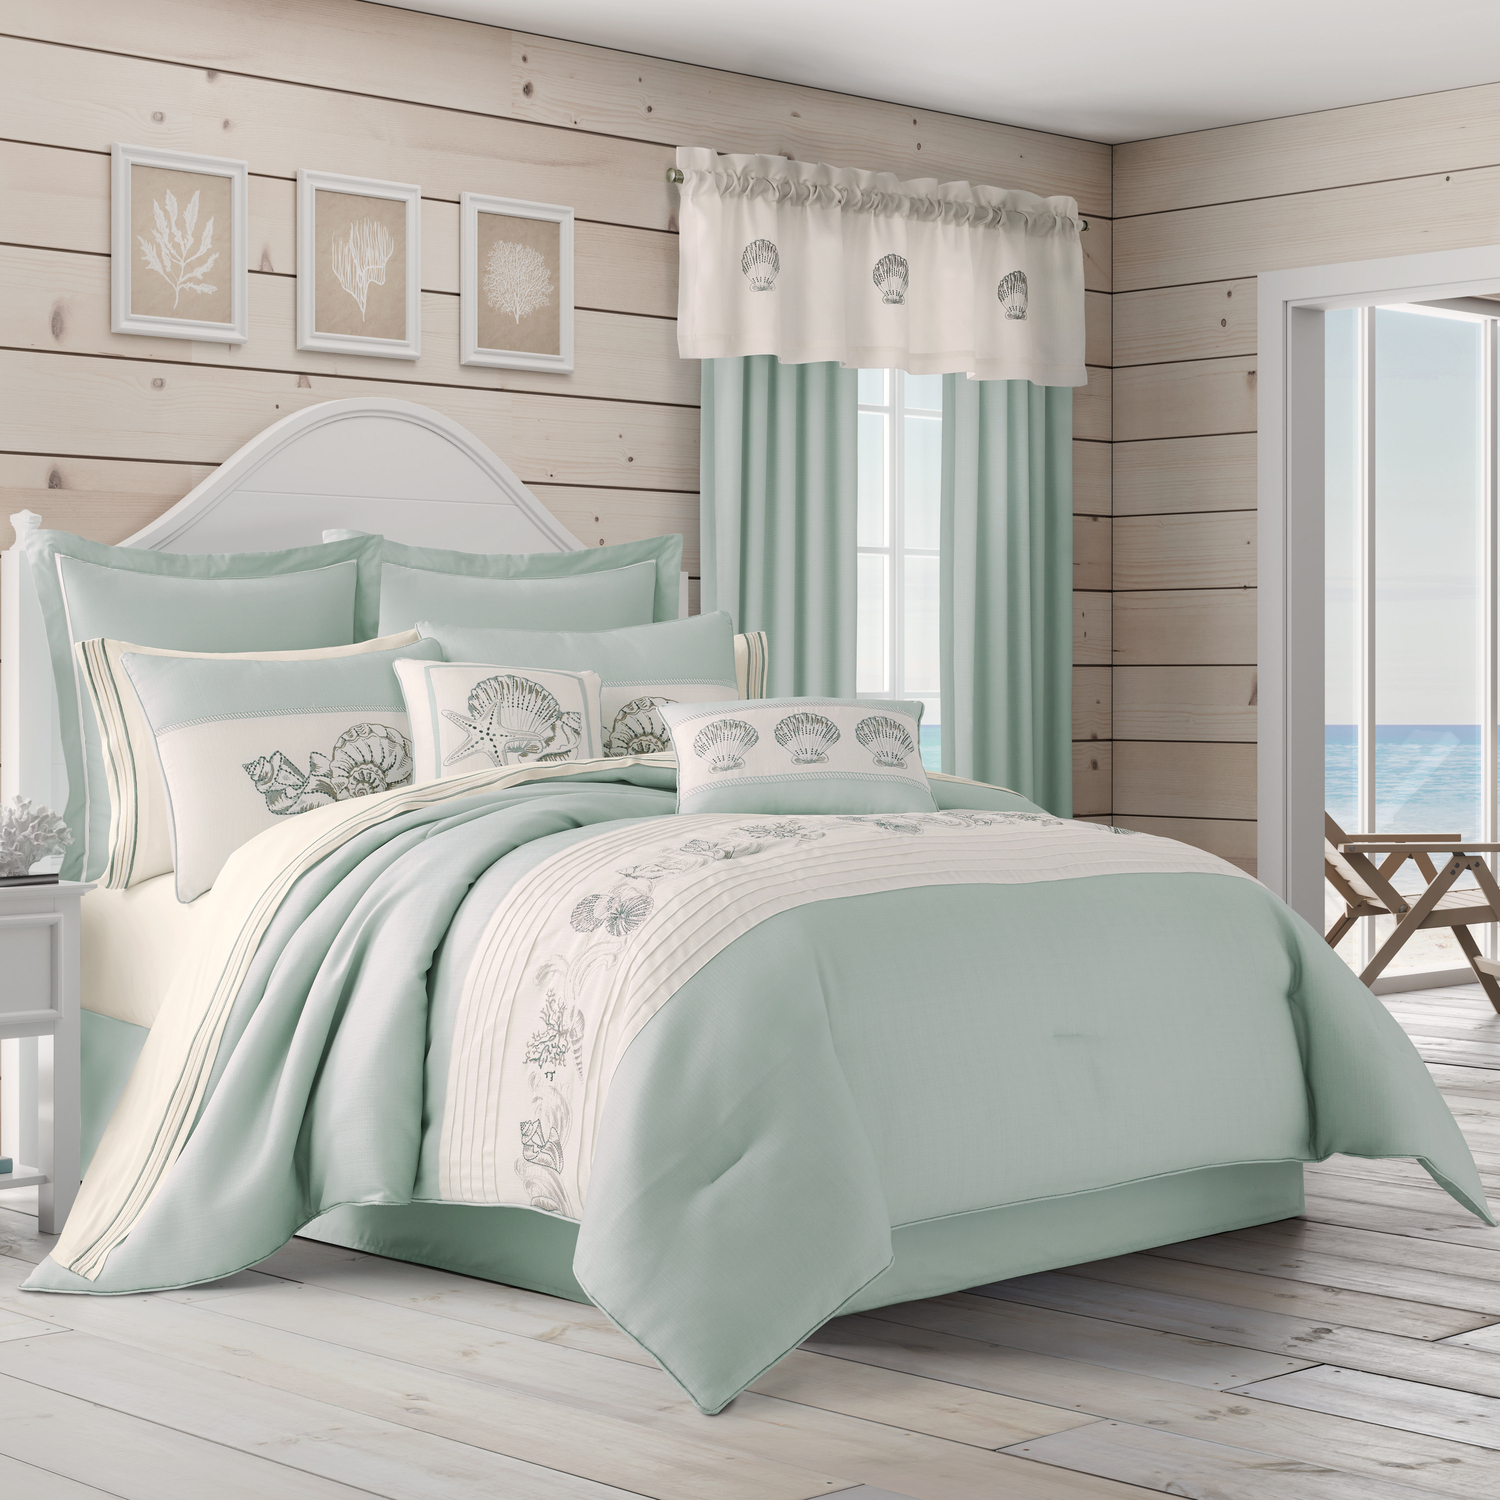 Water's Edge by Royal Court Bedding - BeddingSuperStore.com